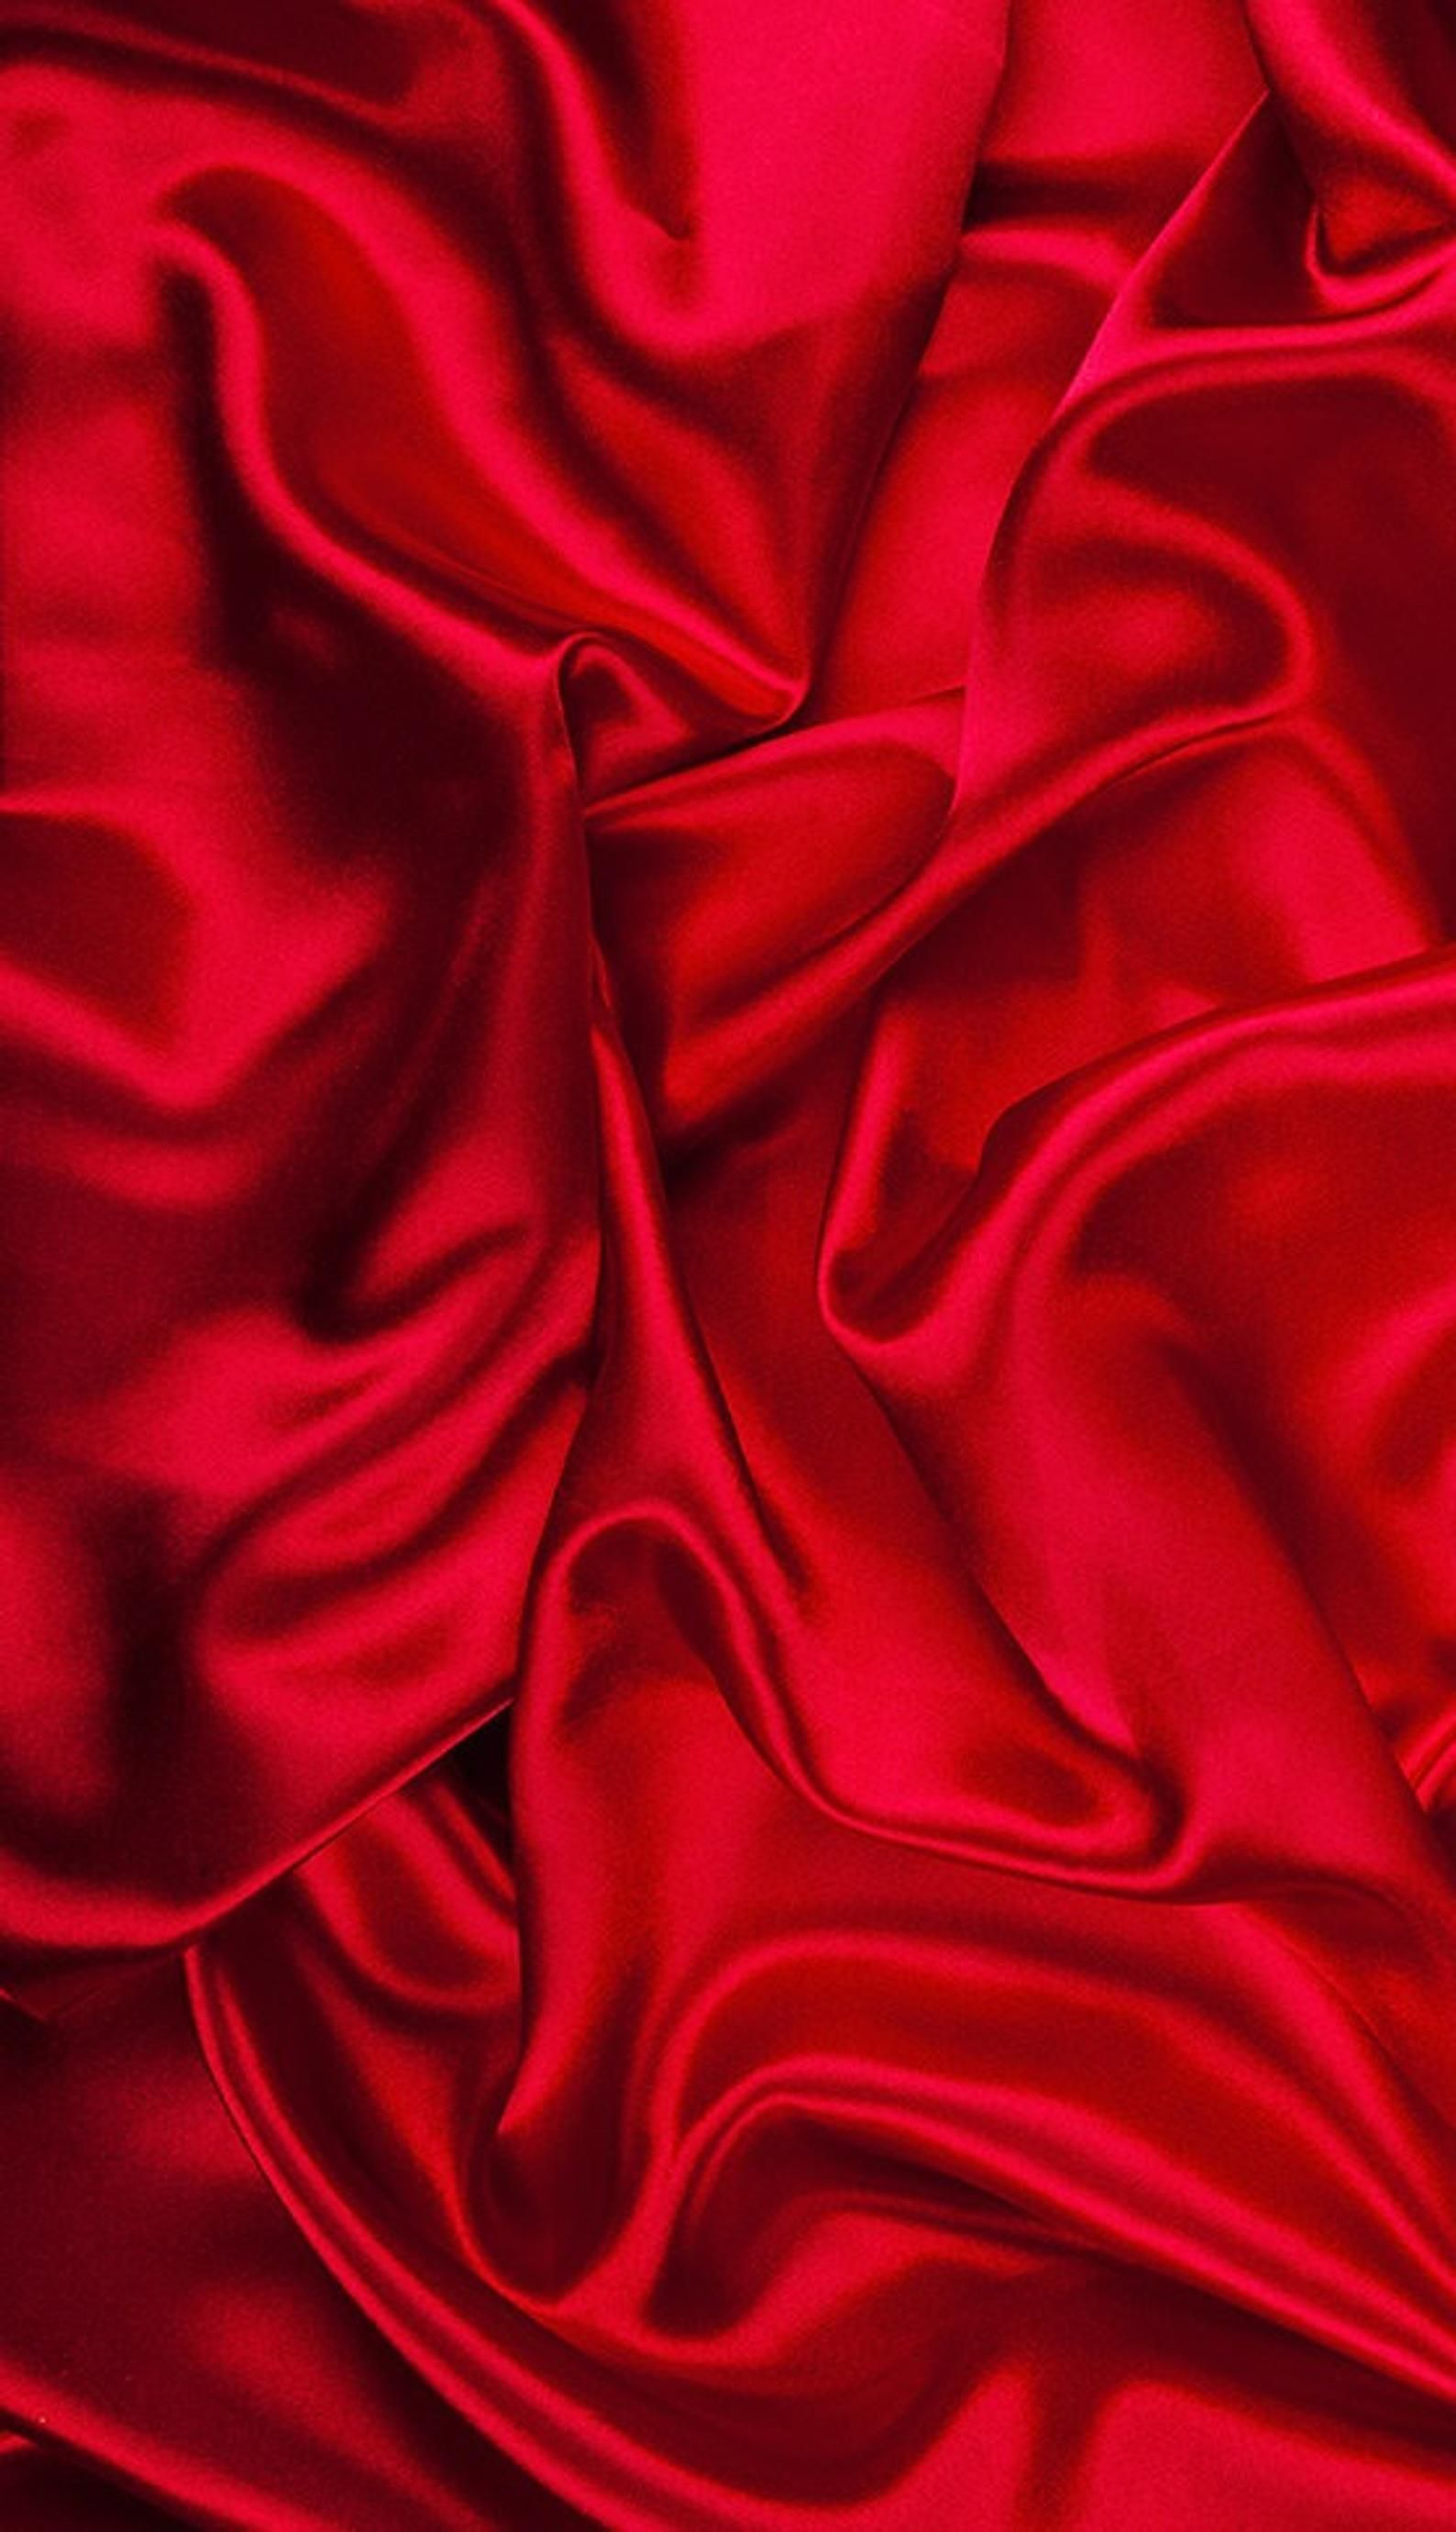 Red Luxury Fabric Background With Copy Space Stock Photo